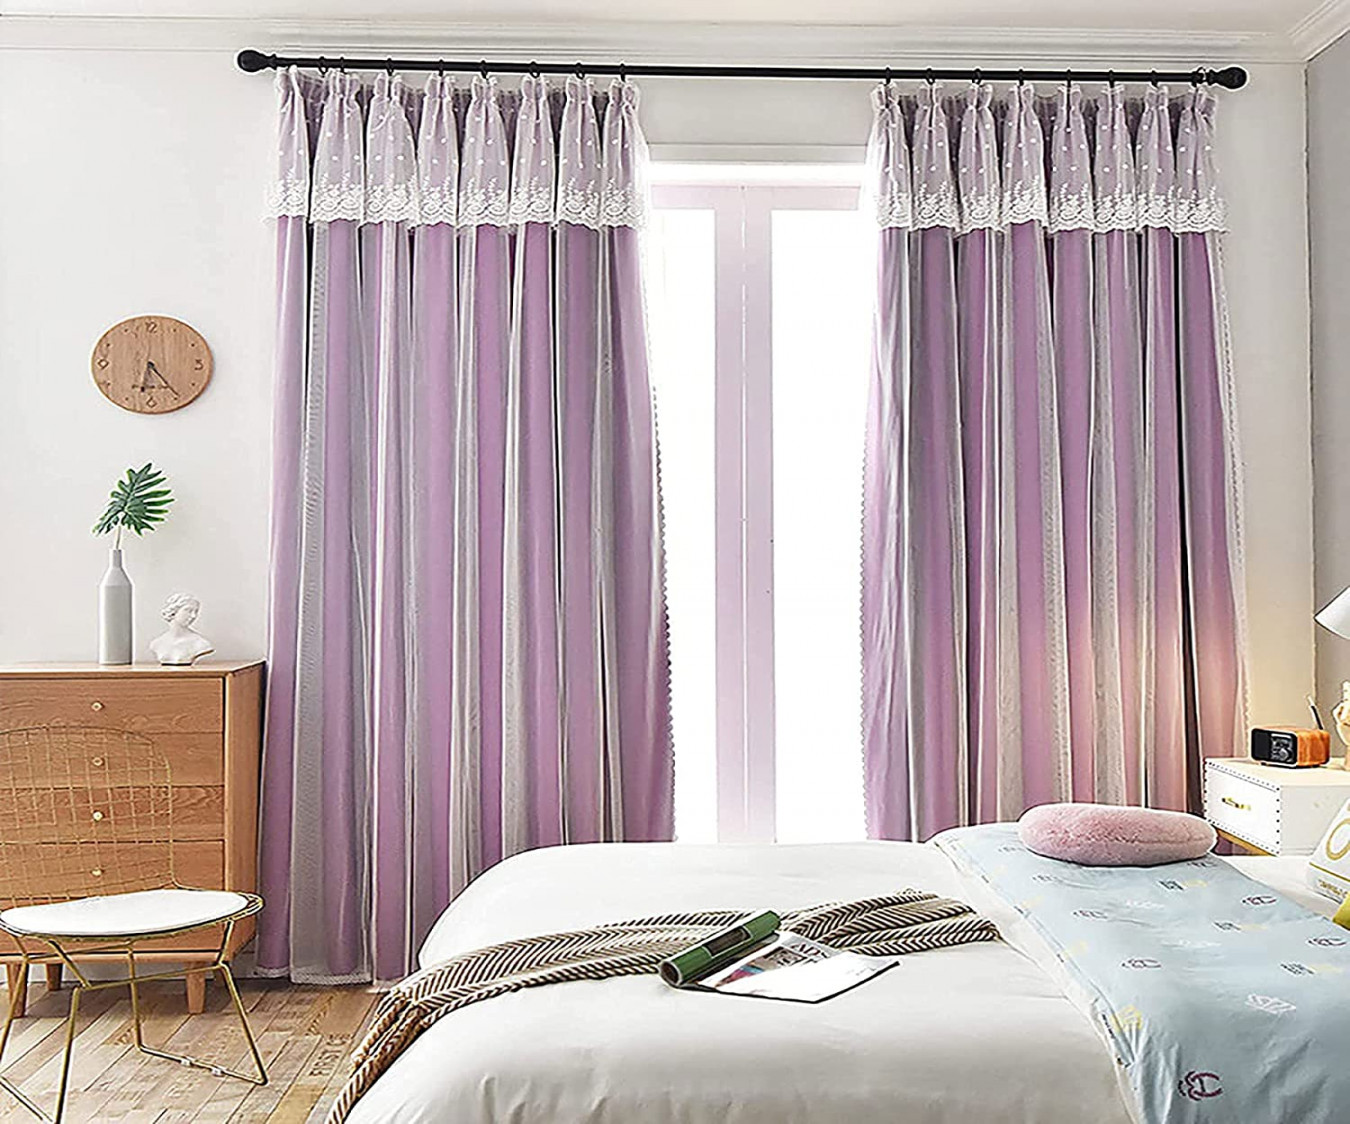 Window Curtains For Bedroom